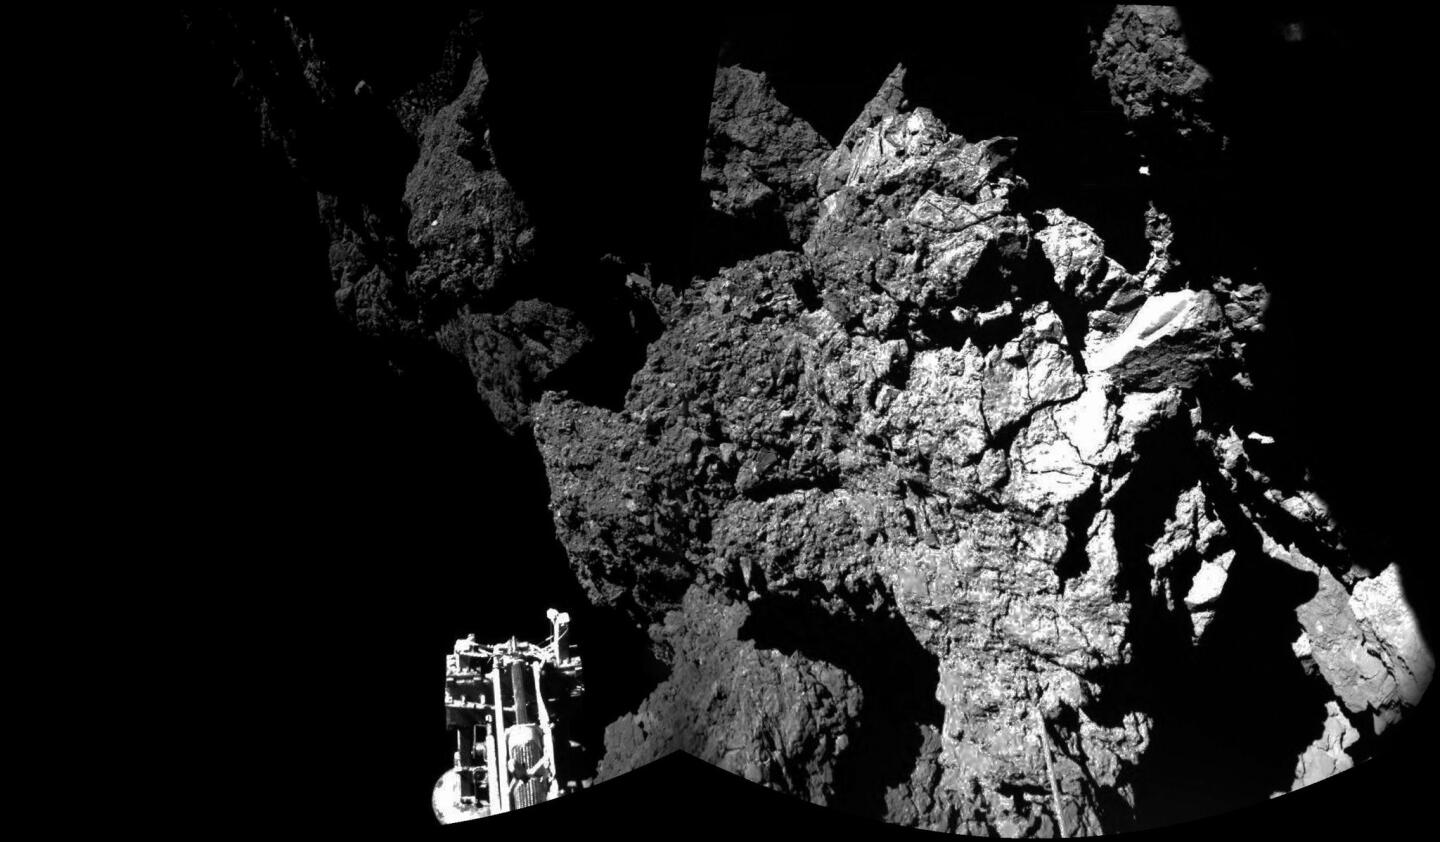 A photo provided by the European Space Agency on Nov. 13 shows the surface of the 67P/Churyumov-Gerasimenko comet as seen from the Philae lander.